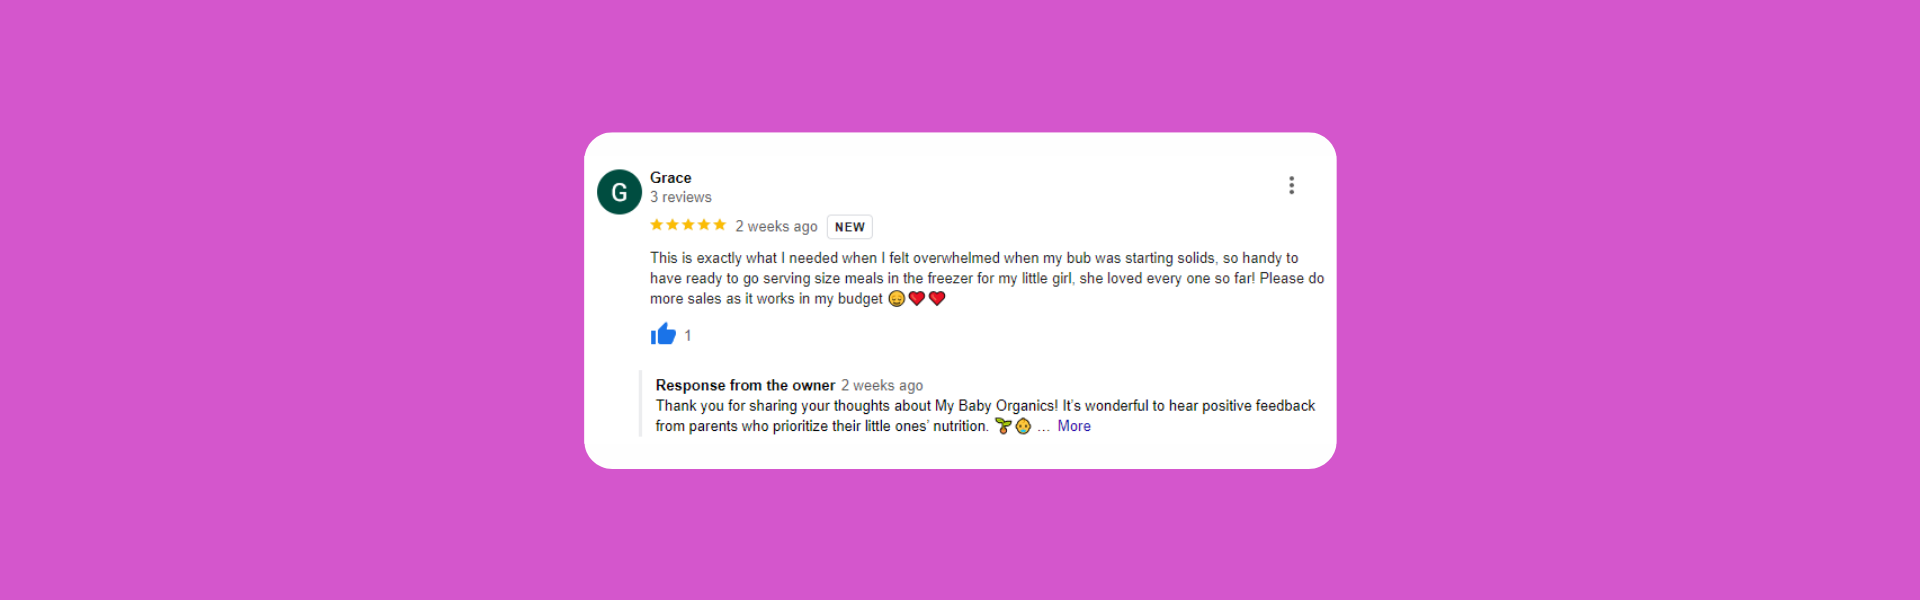 Grace 3 reviews 2 weeks ago - This is exactly what I needed when I felt overwhelmed when my bub was starting solids, so handy to have ready to go serving size meals in the freezer for my little girl, she loved every one so far! Please do more sales as it works in my budget 😌❤️❤️